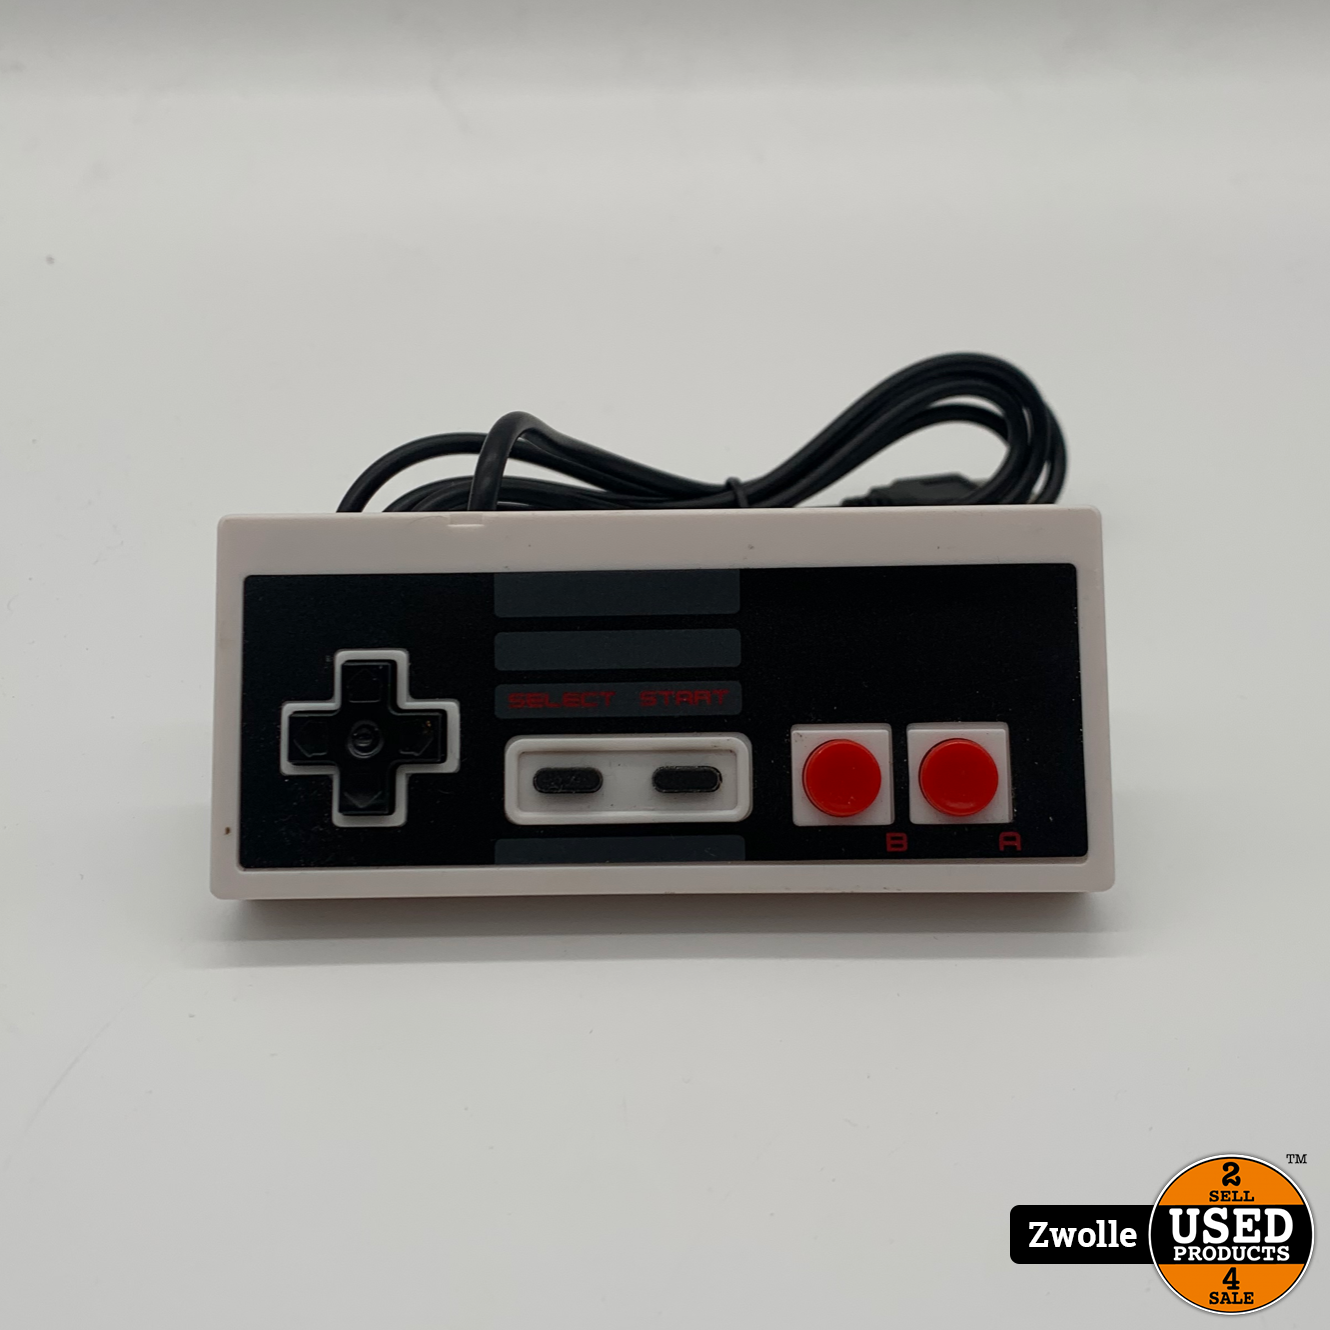 Faeröer schoenen Vul in Nintendo NES controller USB - Used Products Zwolle